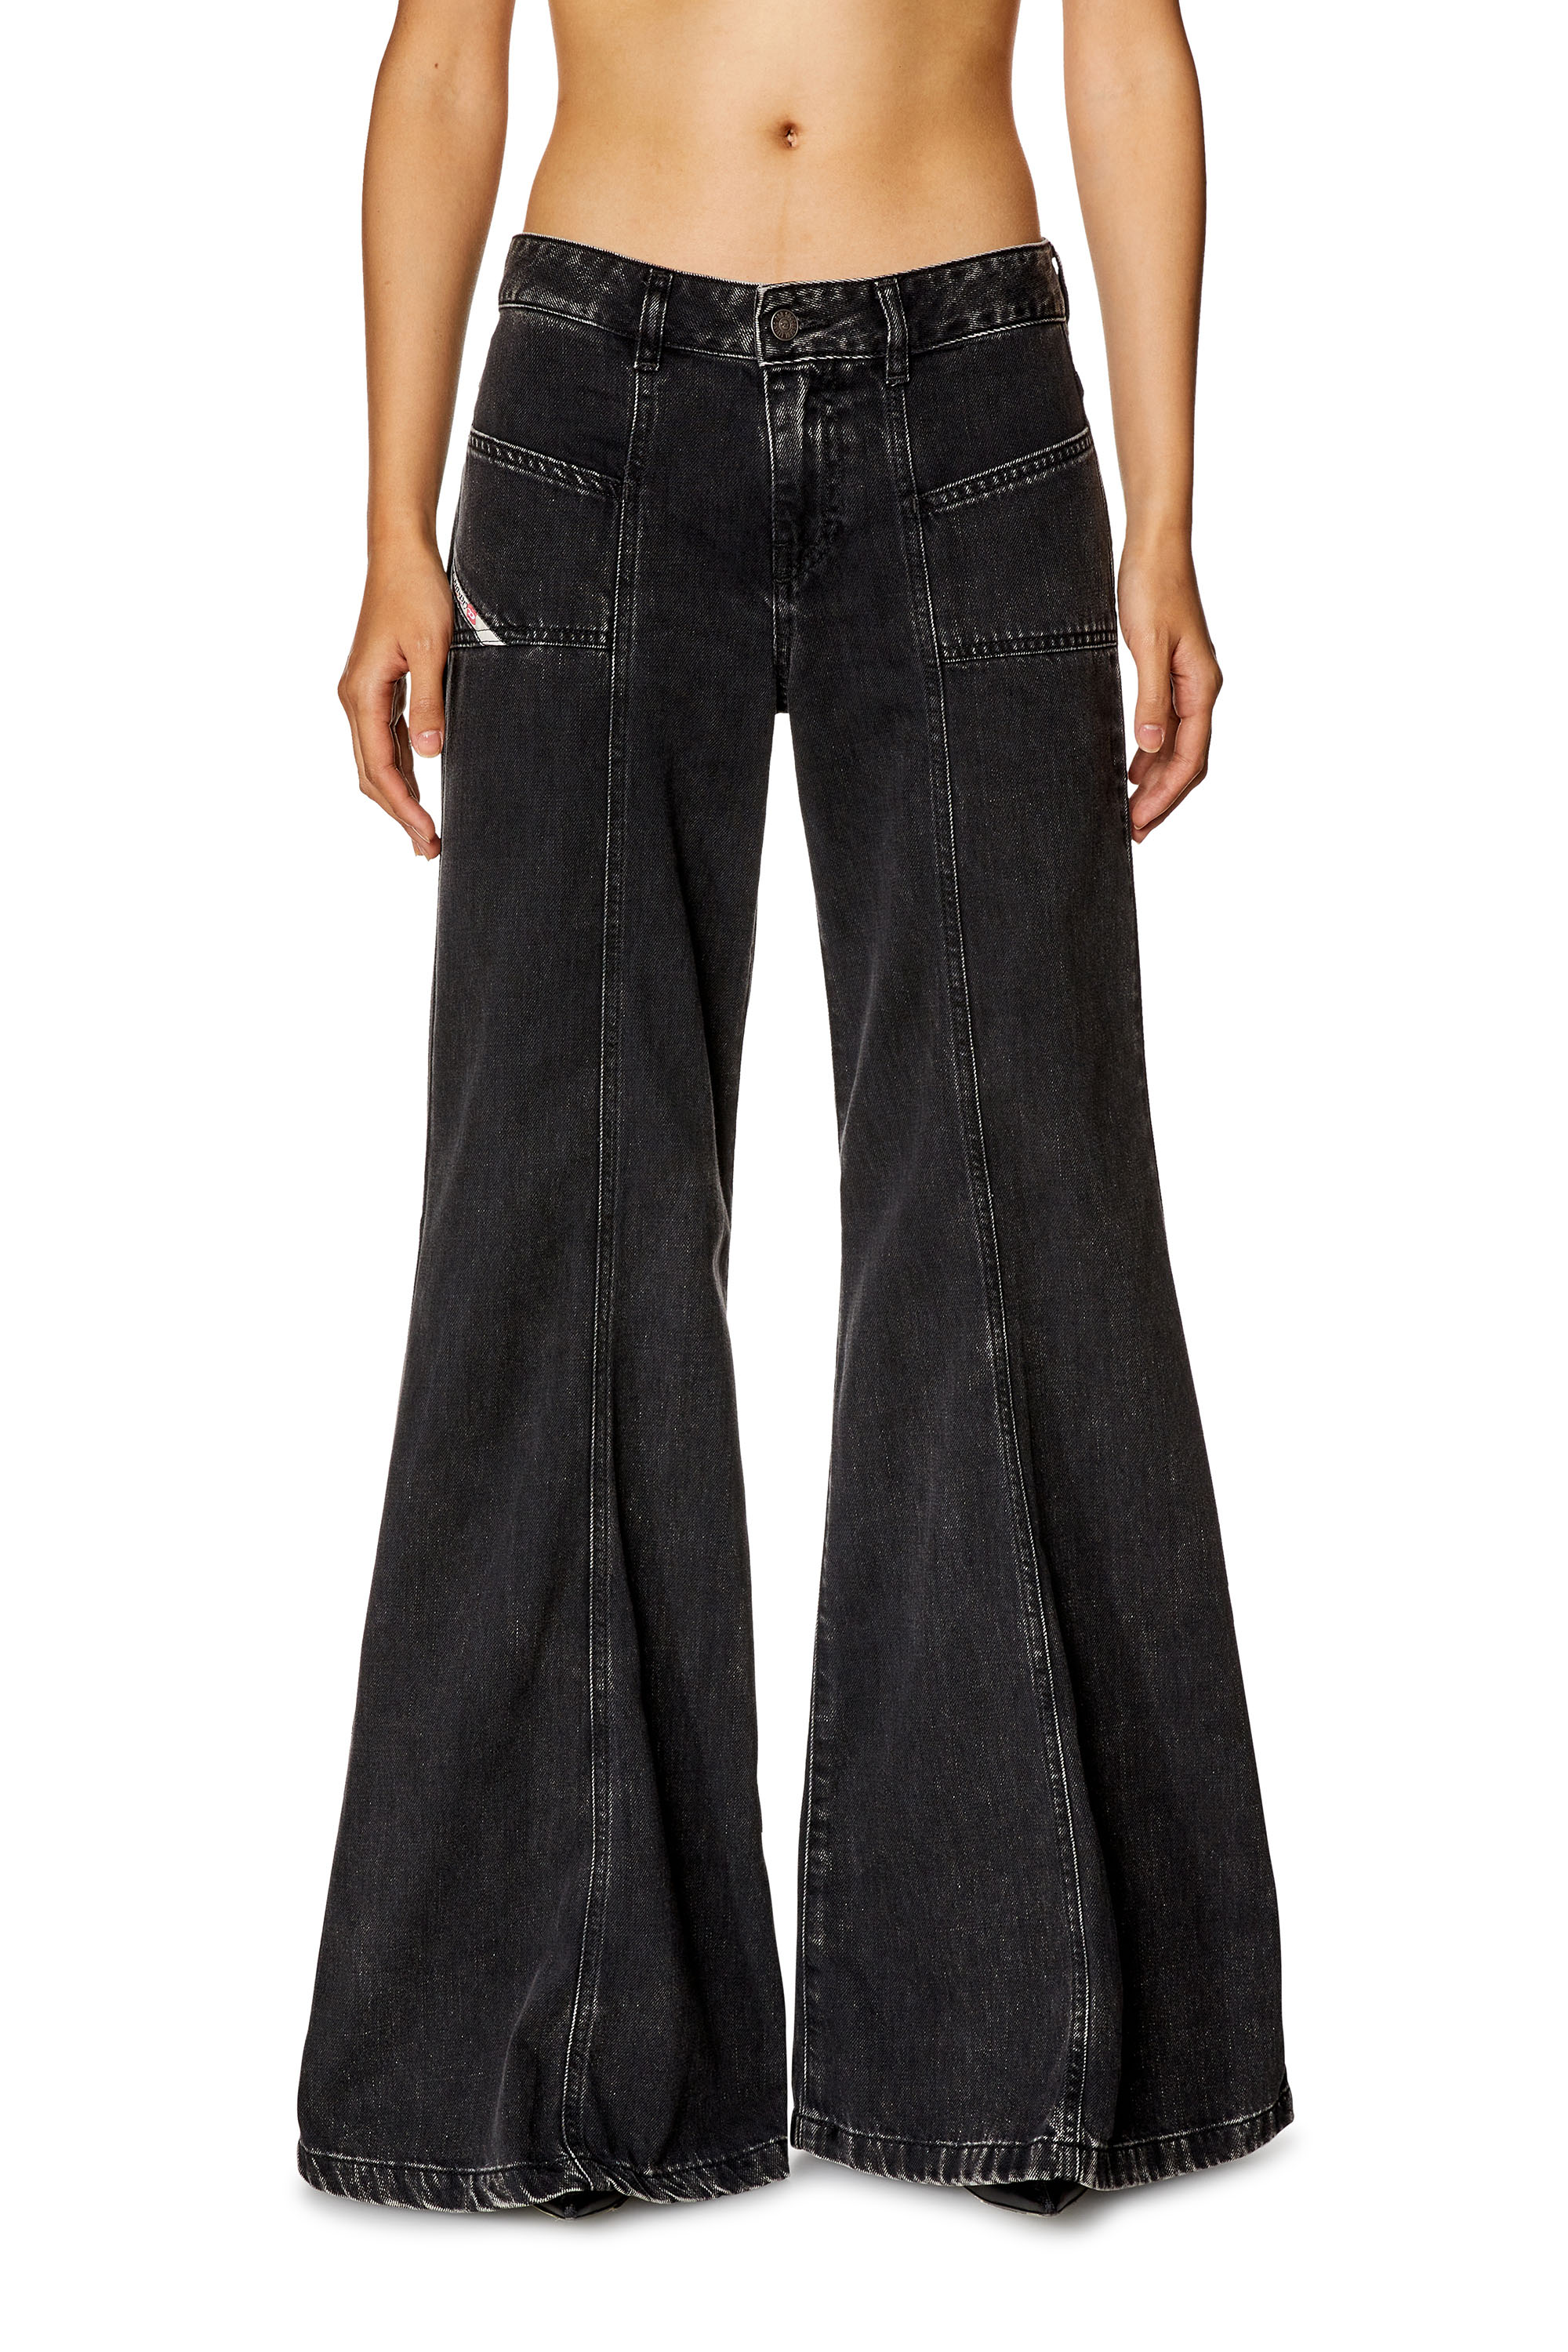 Diesel - Bootcut and Flare Jeans D-Akii 068HN, Mujer Bootcut y Flare Jeans - D-Akii in Negro - Image 2